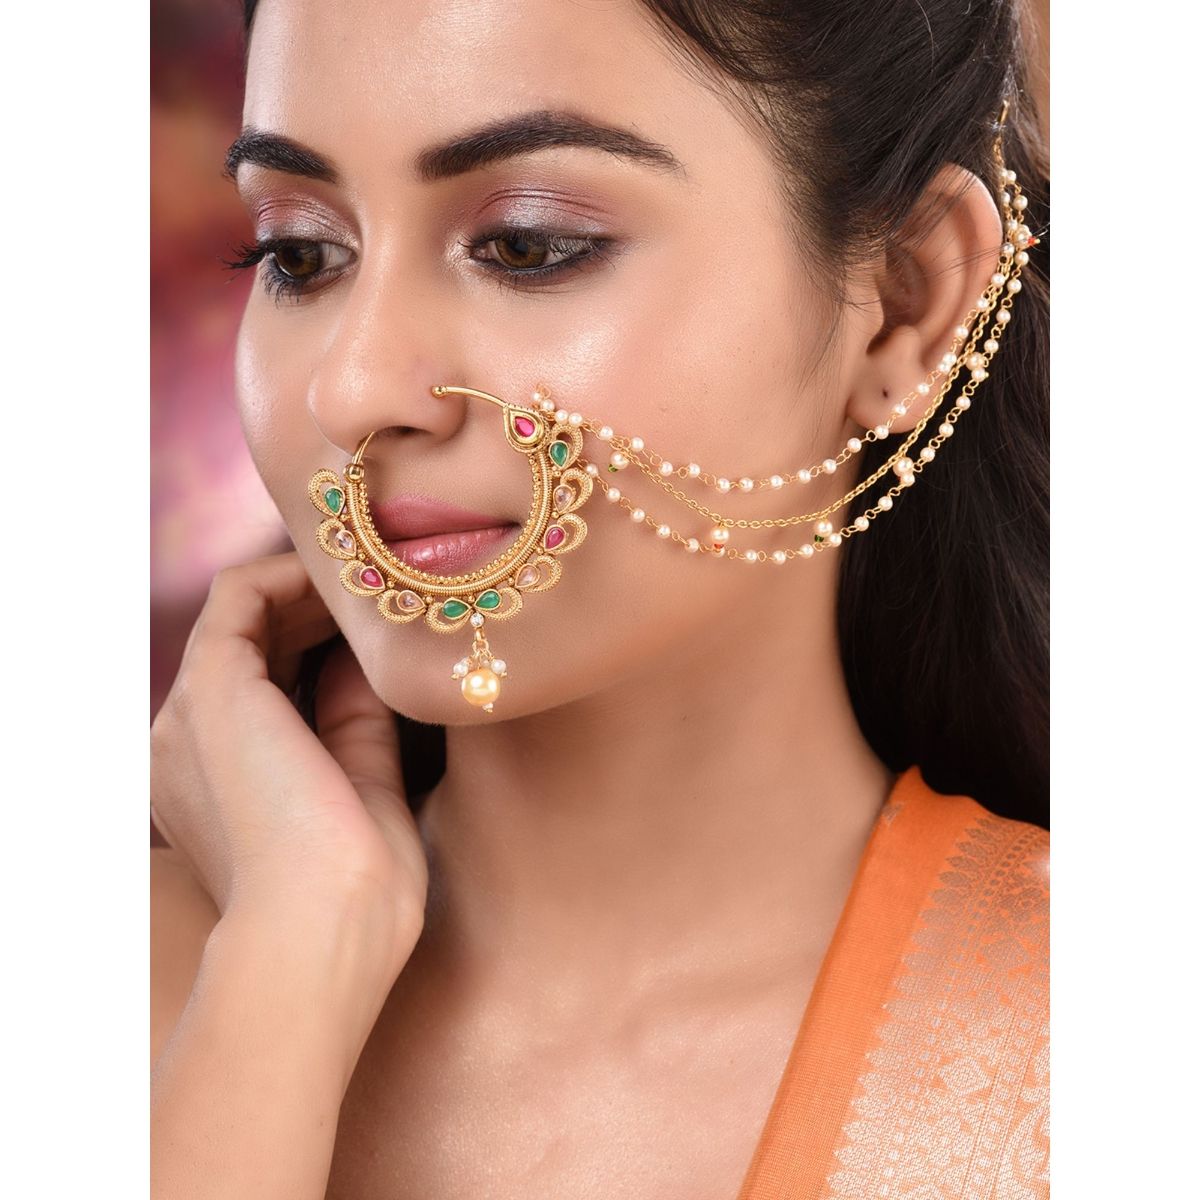 Shop For Best Pearl Nose Rings From Widest Range Online